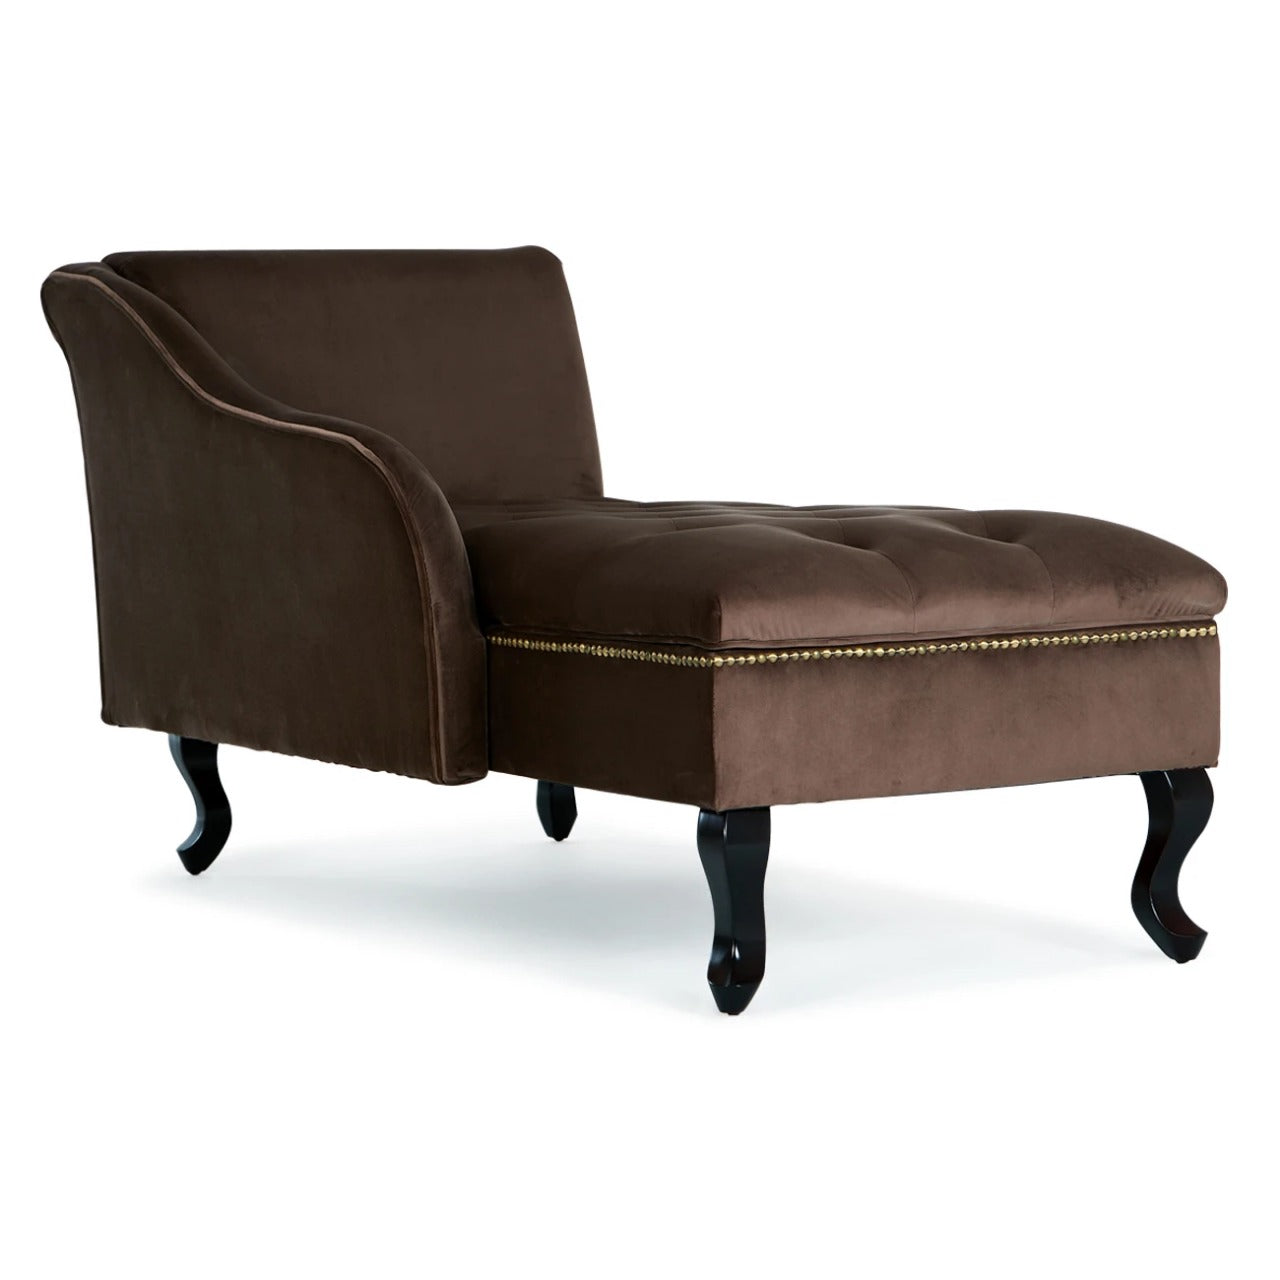 Tufted Chaise: Cozy Brown Velveteen Tufted Chaise Lounge